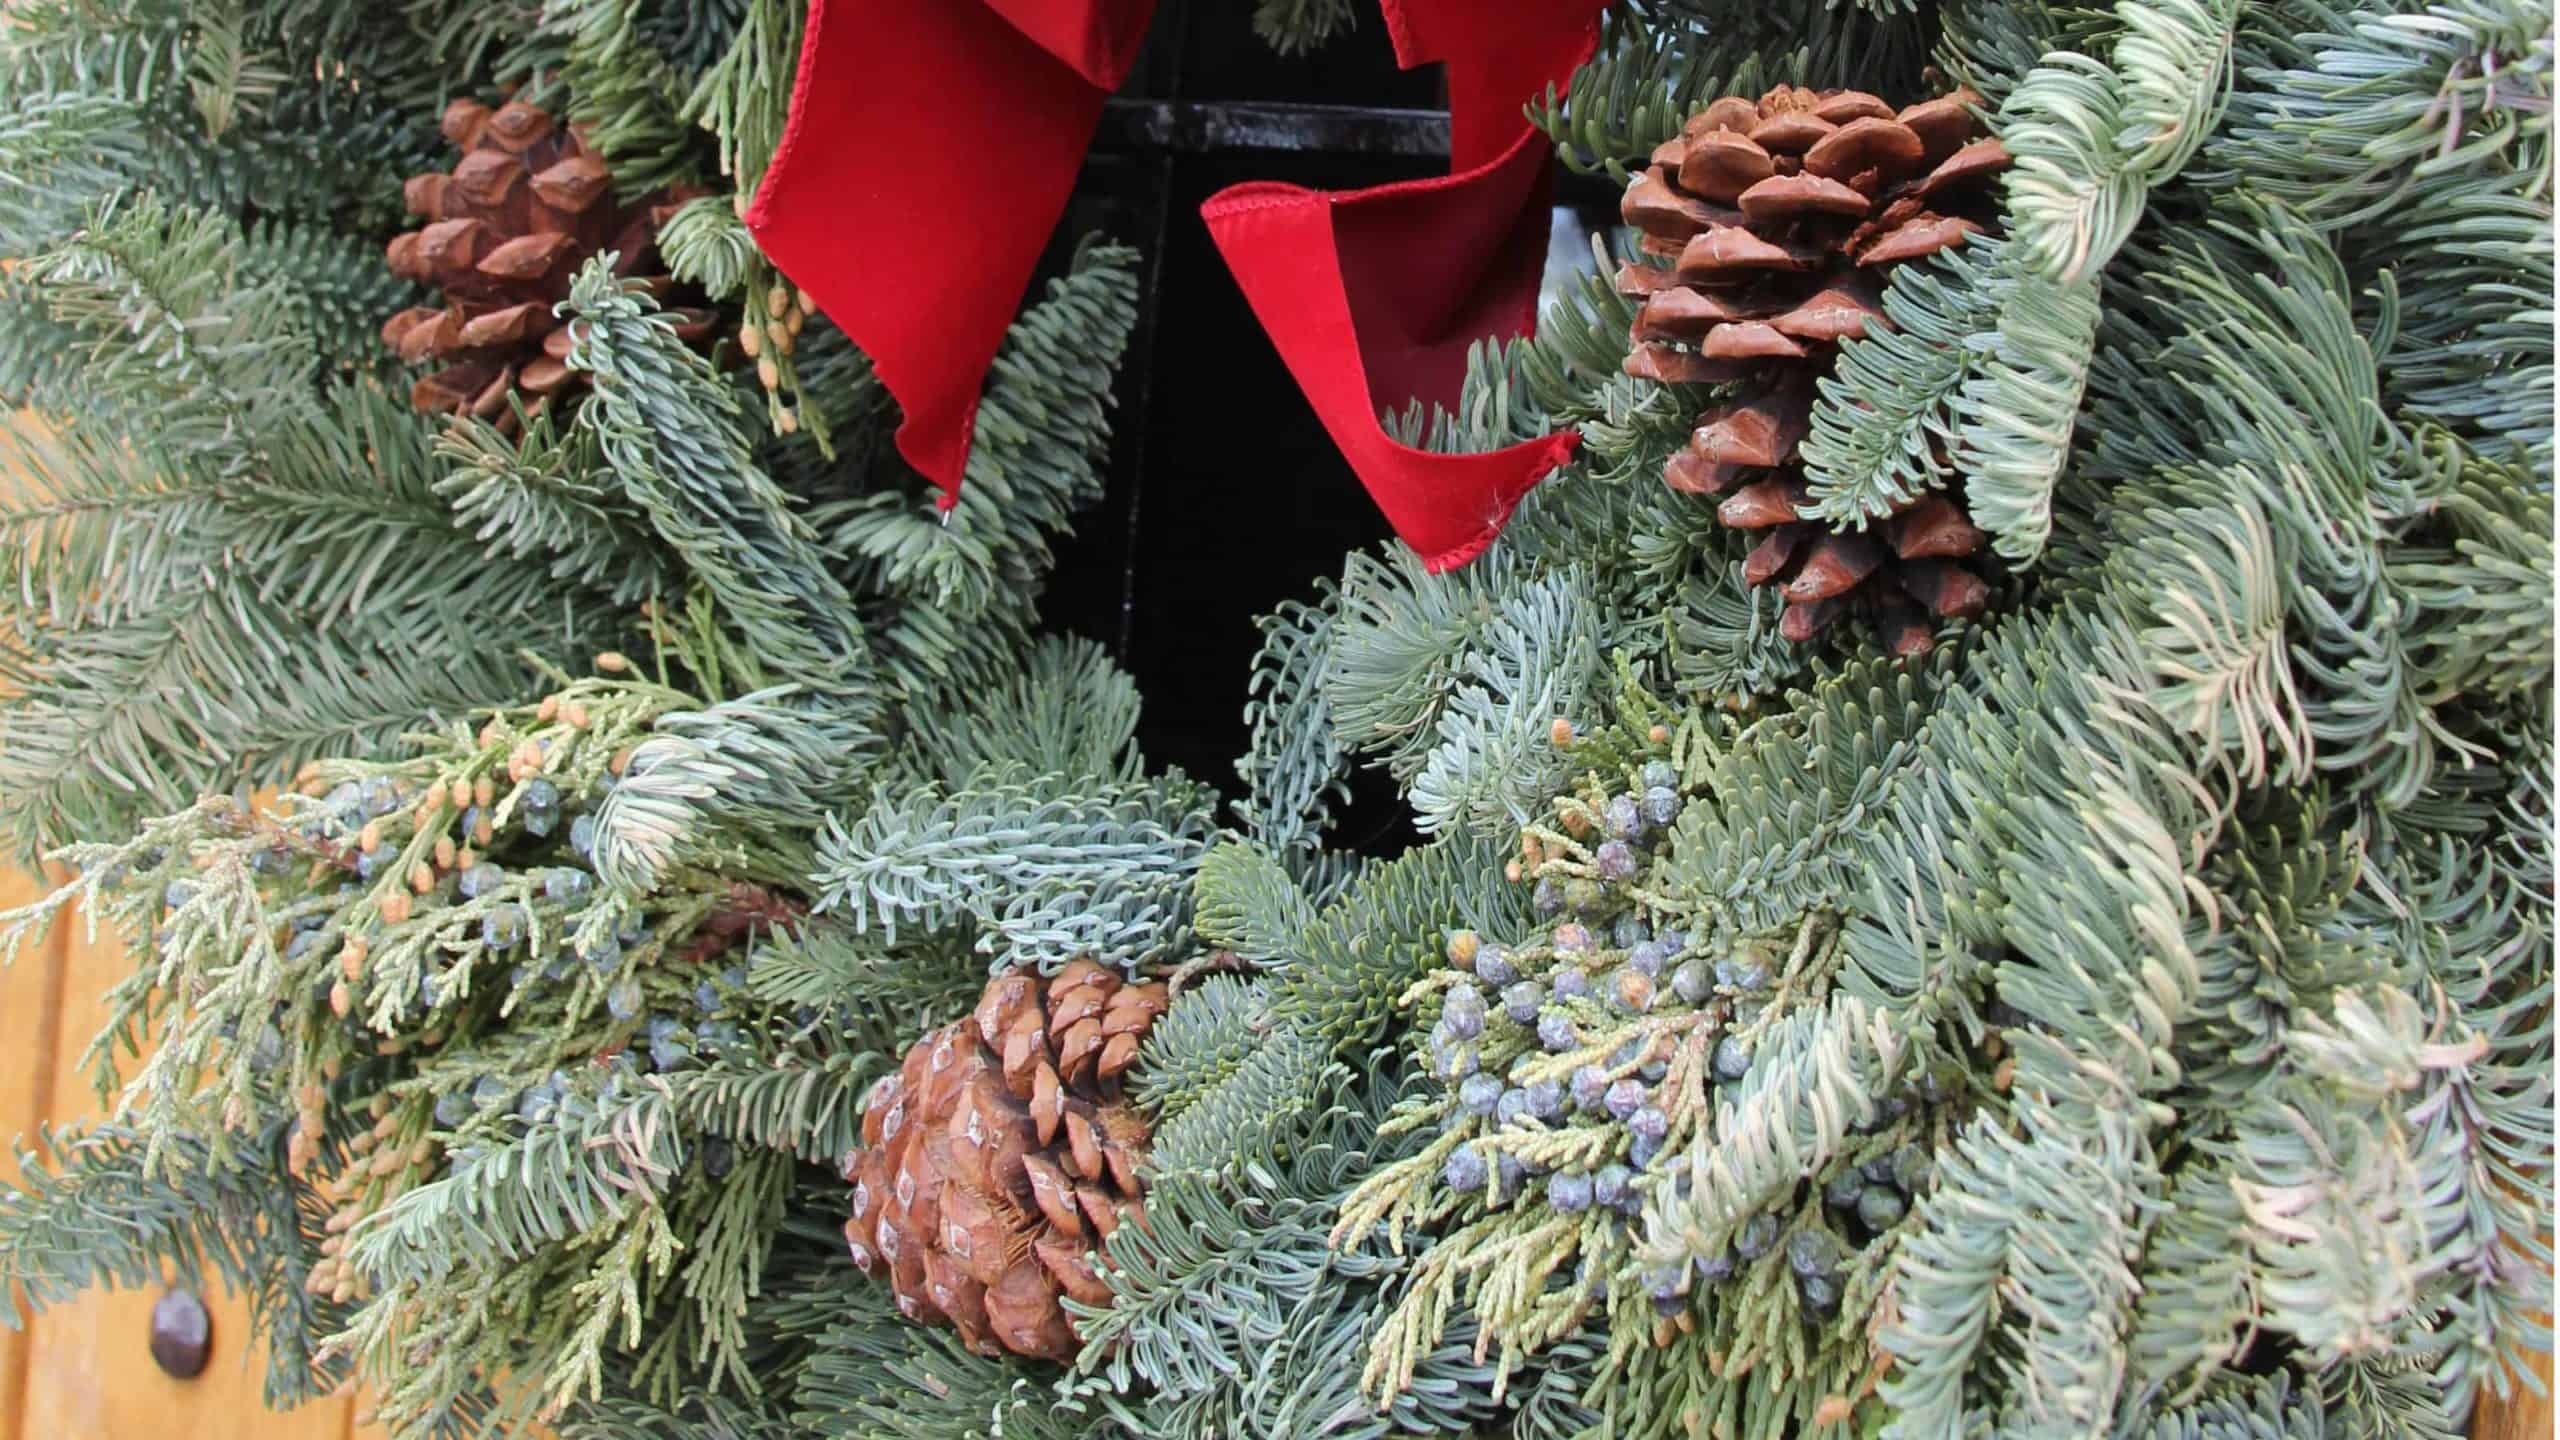 A wreath of evergreens hangs on a wooden door with iron hinges.